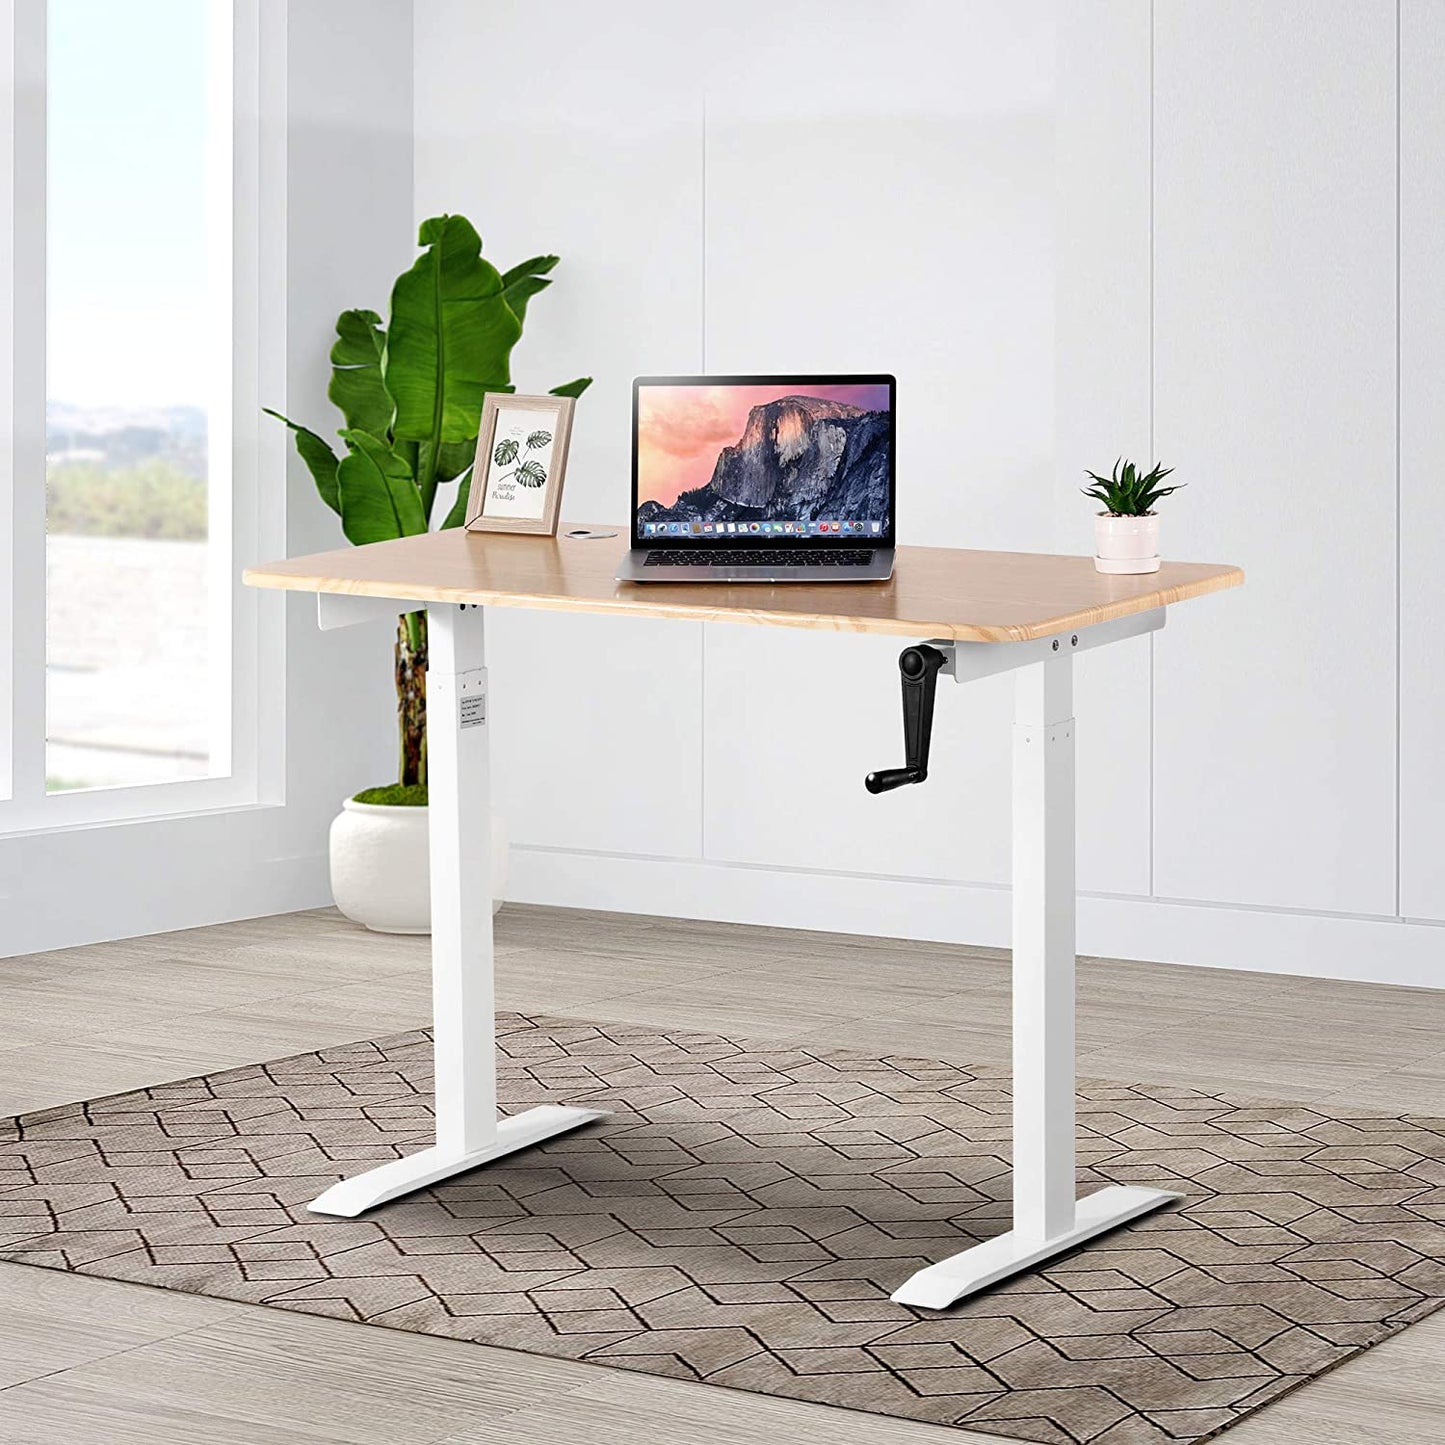 UNICOO - Crank Adjustable Height Standing Desk, Adjustable Sit to Stand up Desk,Home Office Table, Computer Table, Portable Writing Desk, Study Table (NTCSET-01)